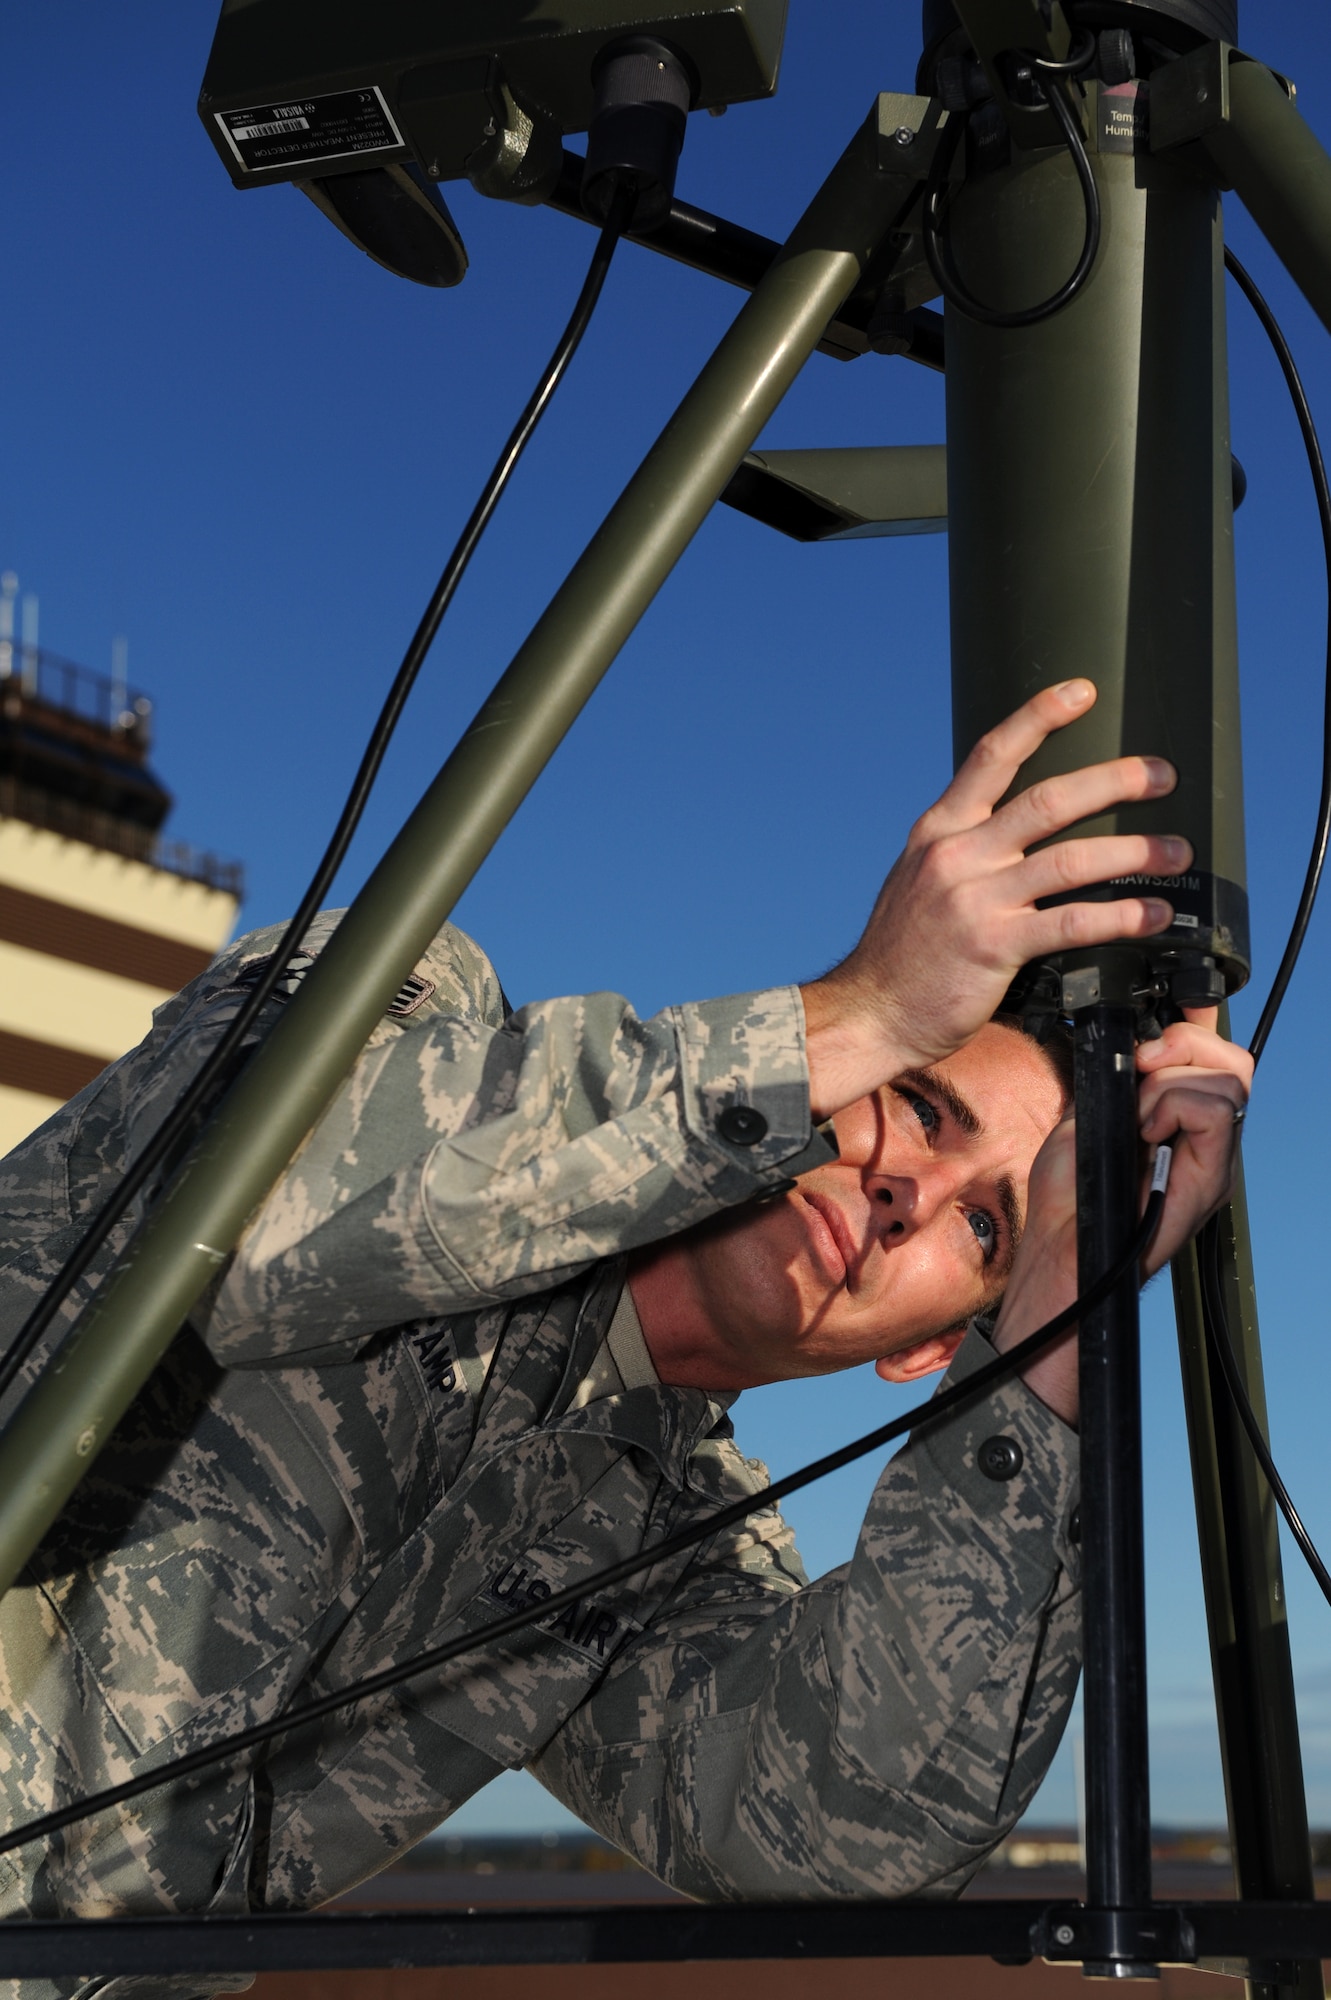 SPANGDAHLEM AIR BASE, Germany – Staff Sgt. Andrew Camp, 52nd Operations Support Squadron weather technician, works to set up a TQM-53 tactical meteorological observing system here Nov. 4. The 52nd OSS Weather Flight received an “Excellent” rating on its Standardization and Evaluation Program for Weather Operations inspection after demonstrating their ability to provide safe and efficient air-traffic service to the 52nd Fighter Wing and 726th Air Mobility Squadron. (U.S. Air Force photo/Airman 1st Class Matthew B. Fredericks)